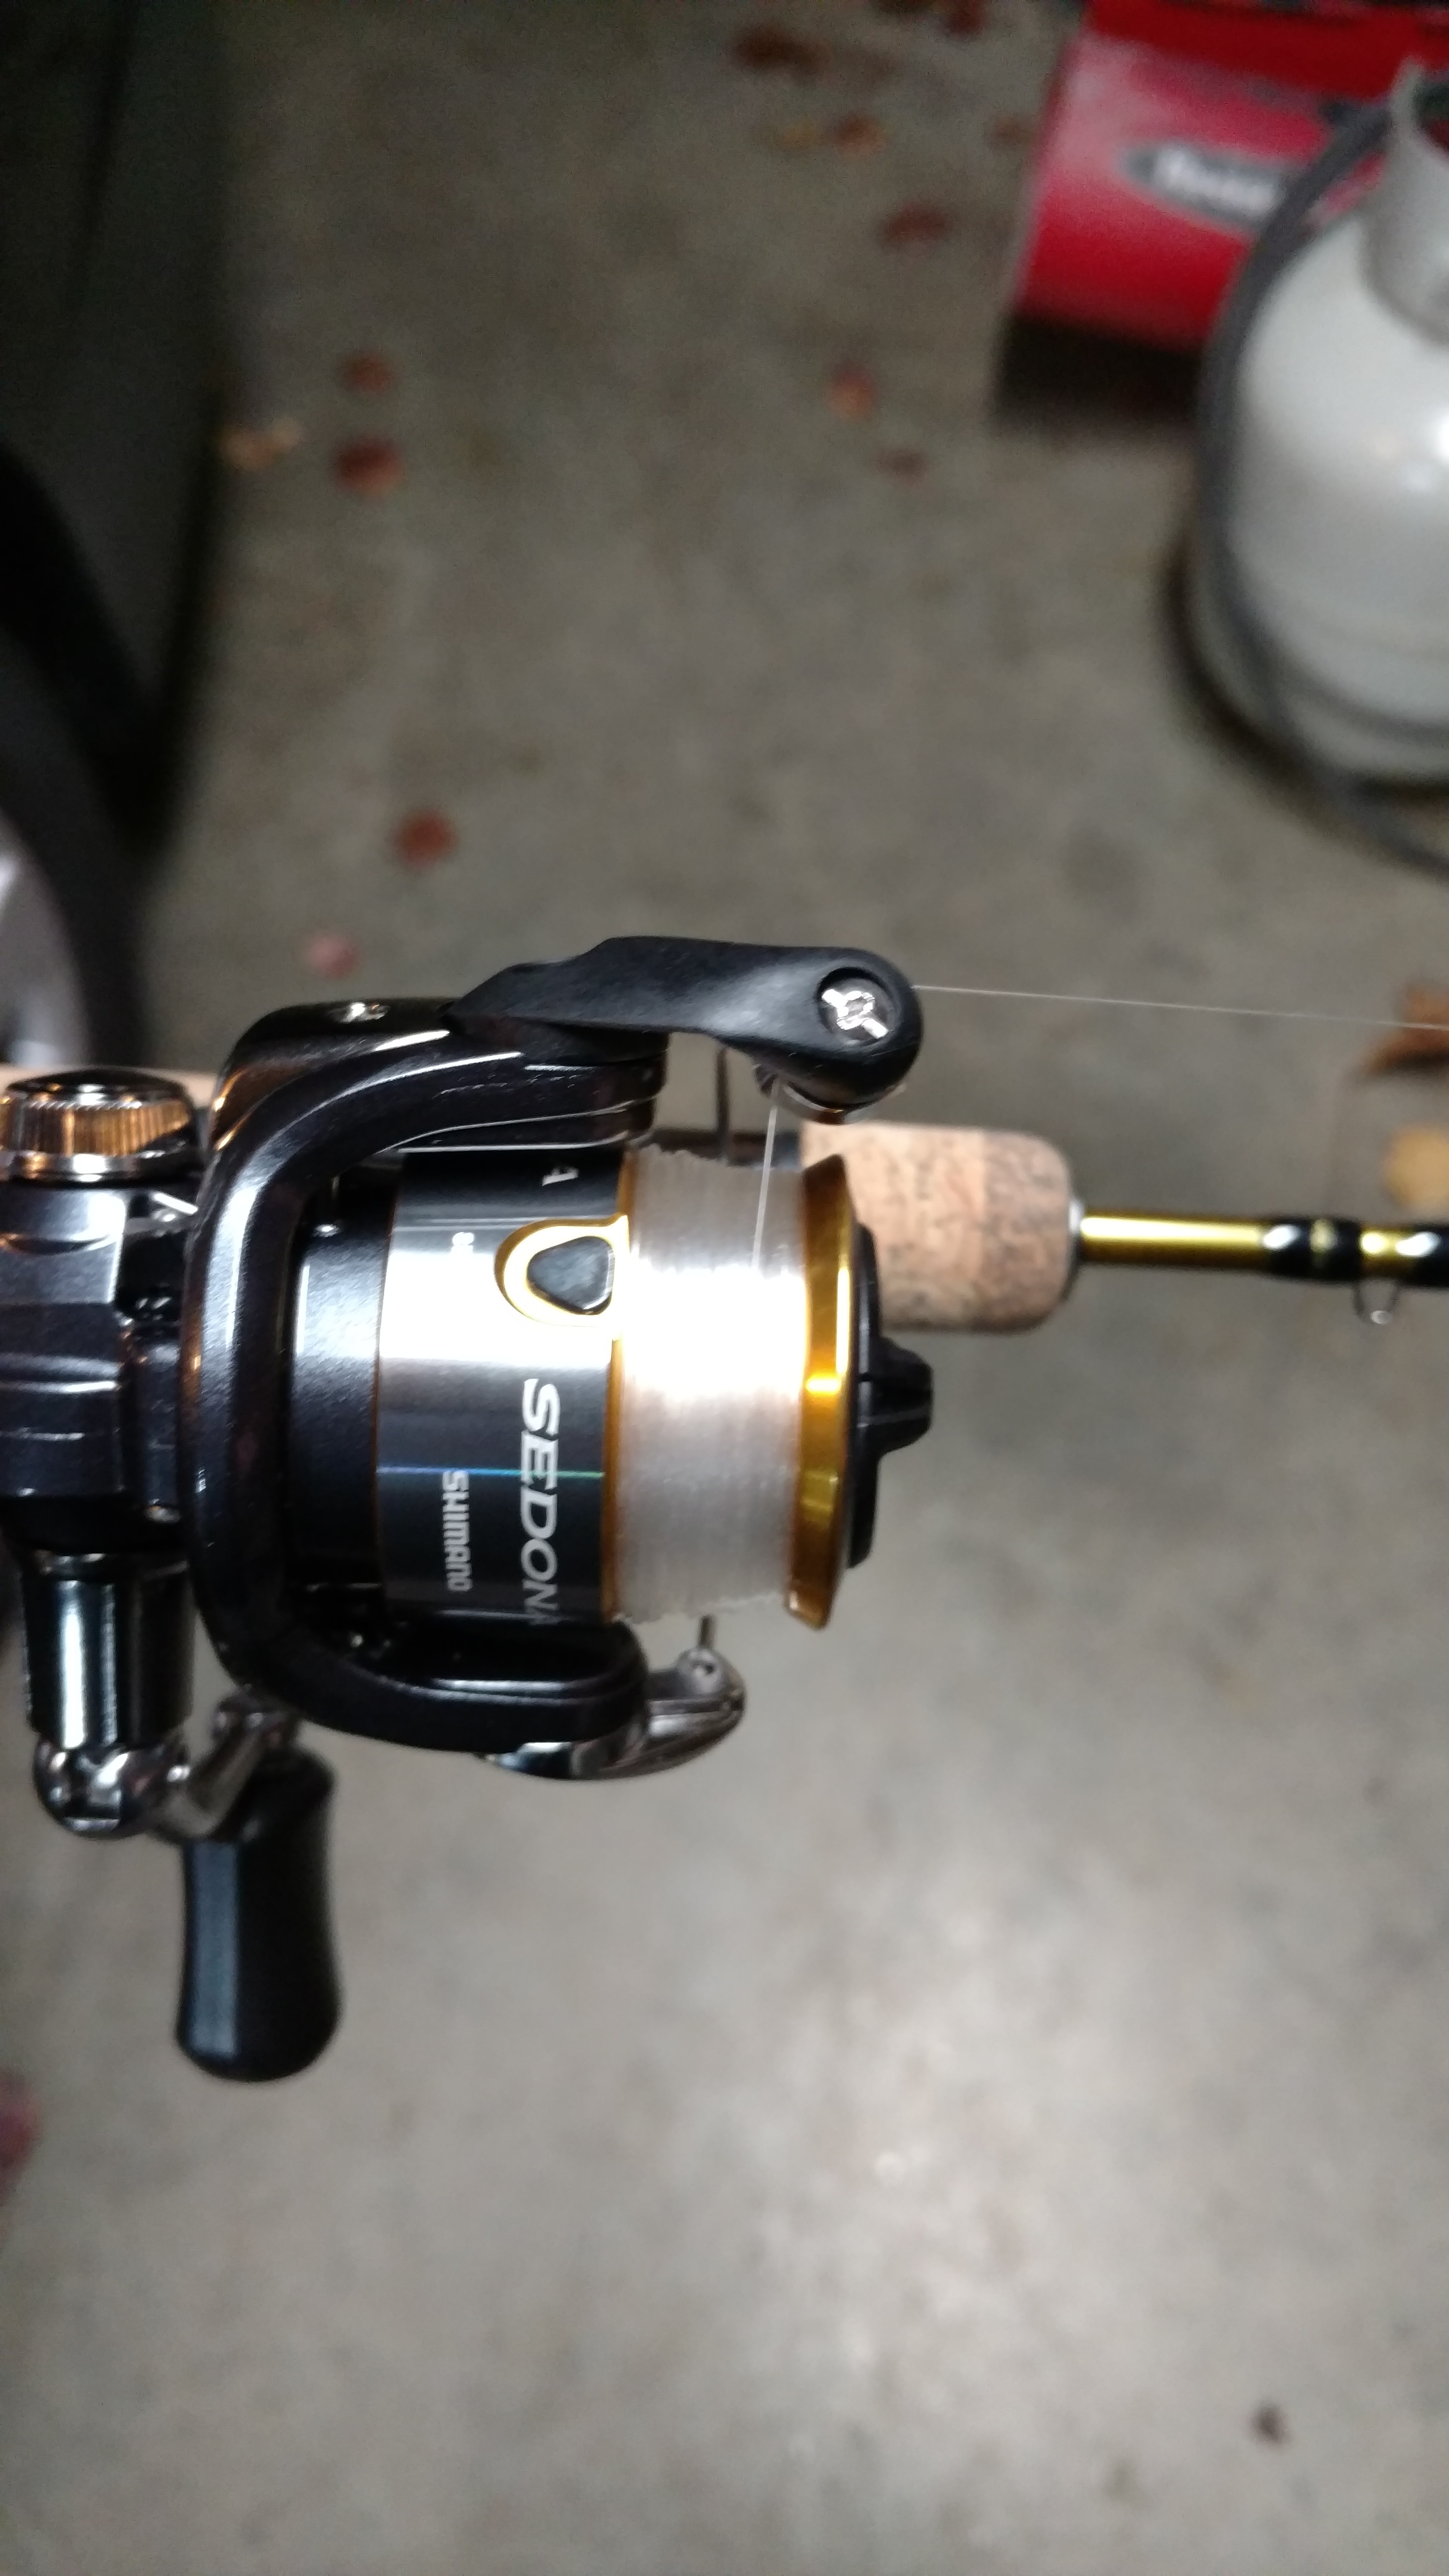 New reel spooling unevenly - Fishing Rods, Reels, Line, and